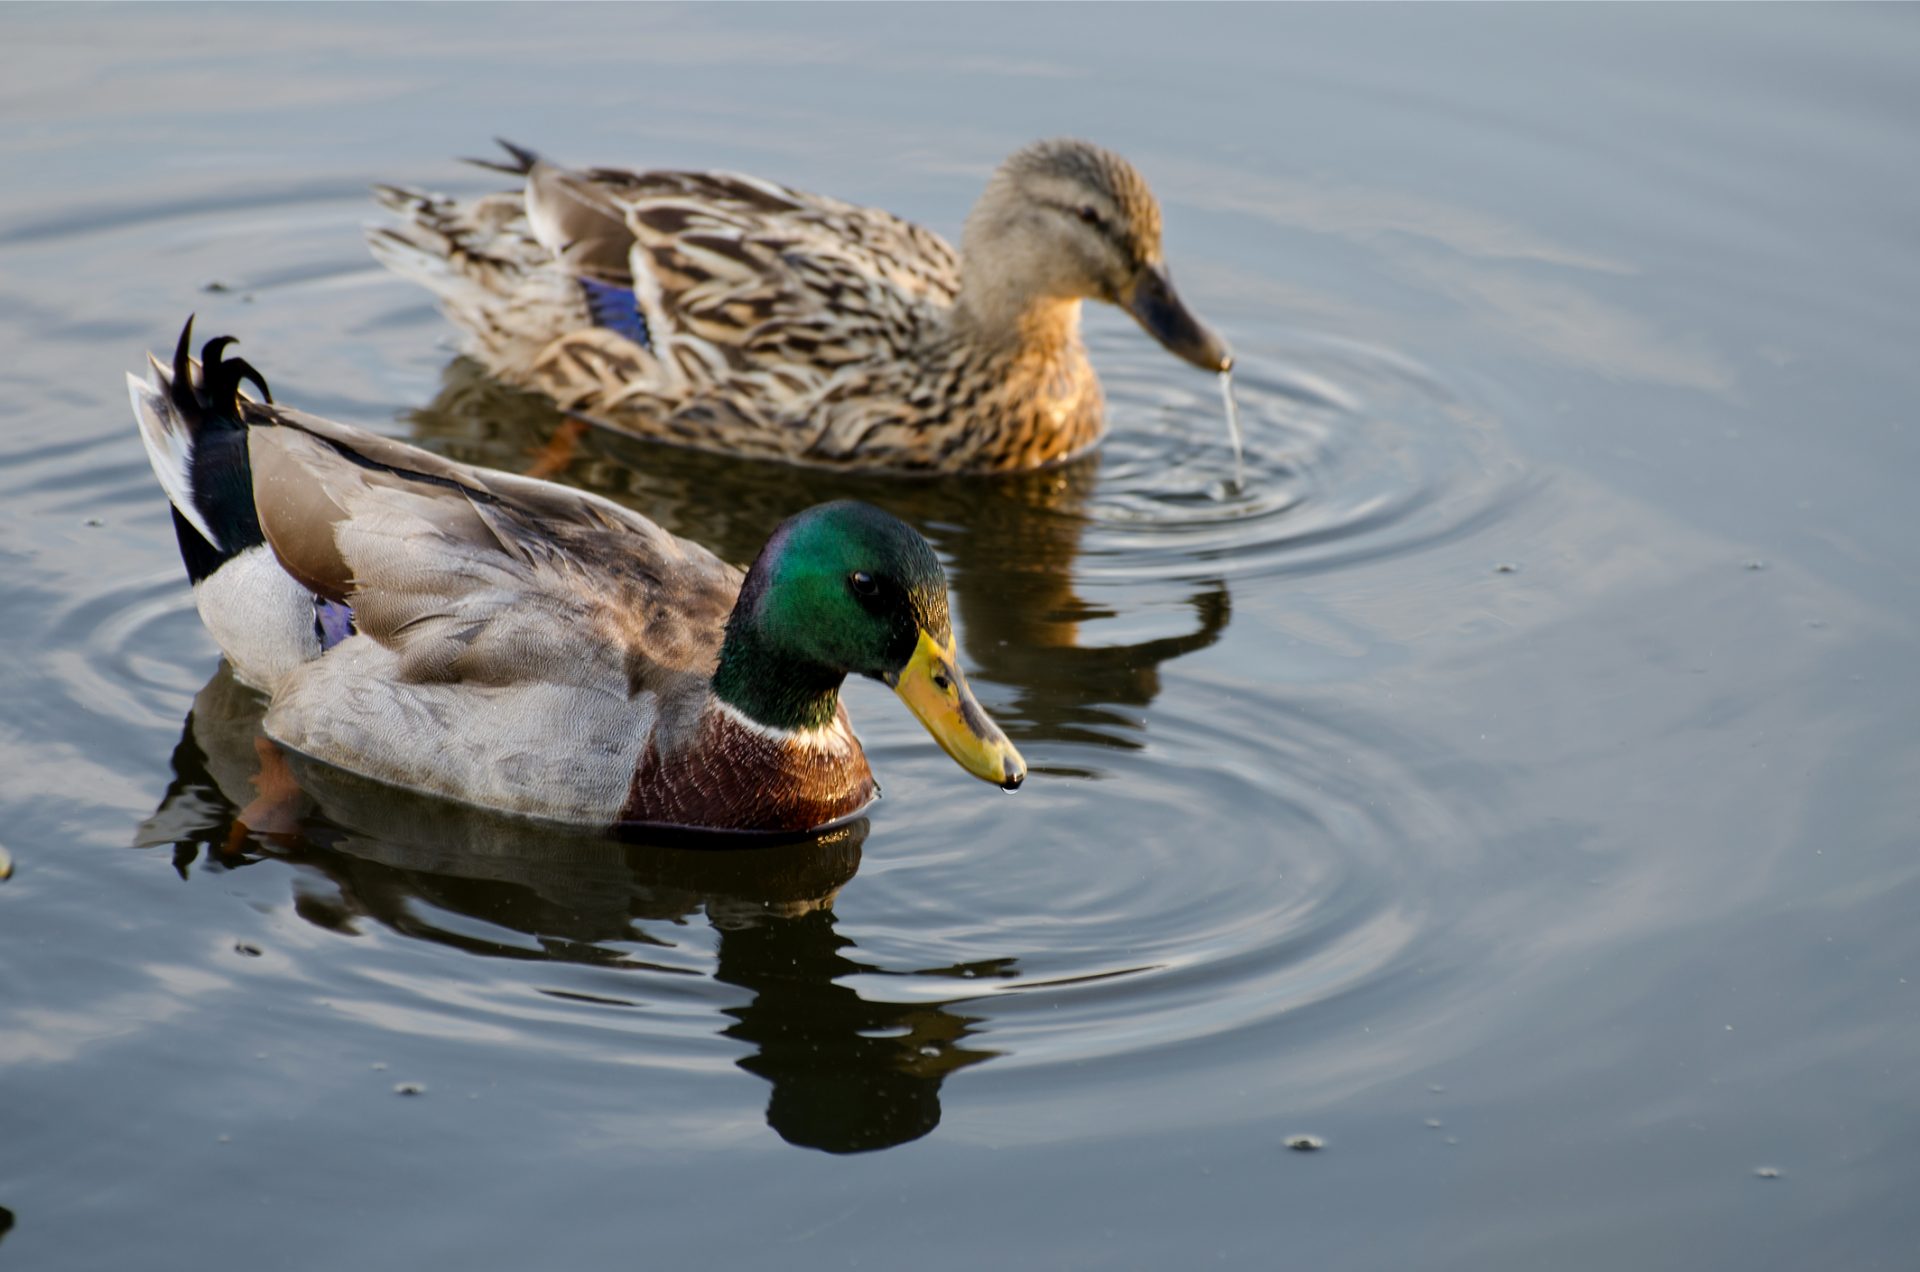 The Sopranos: Maybe it was all about “those goddamn ducks.”